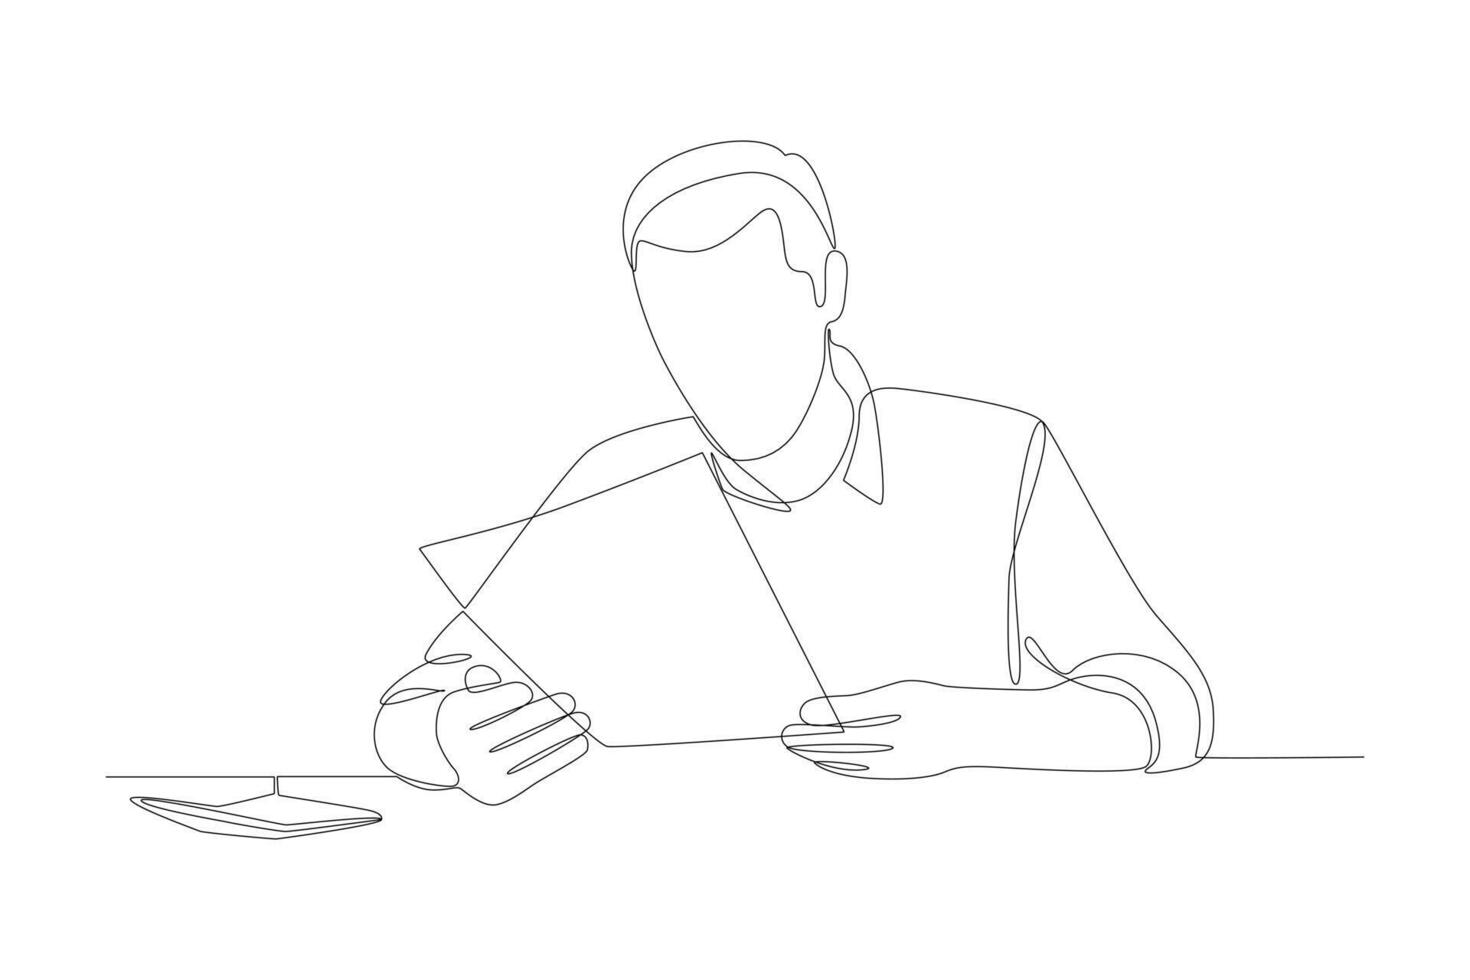 Continuous one line drawing Financial administration concept. Doodle vector illustration.